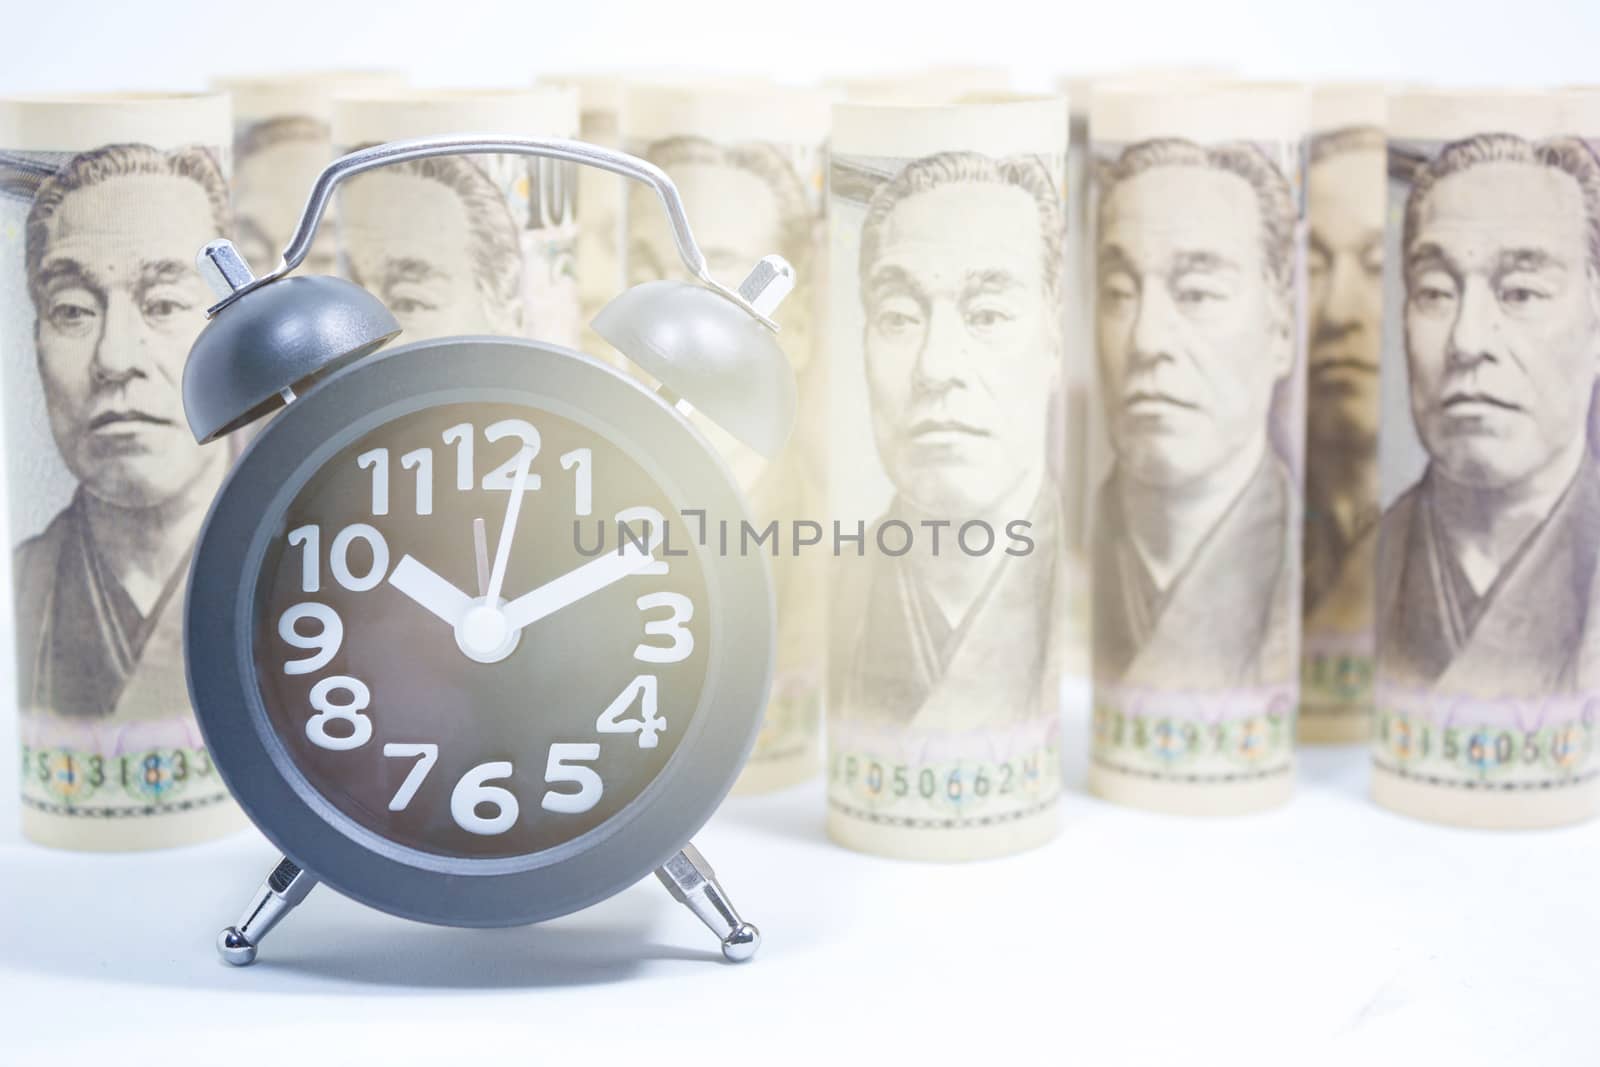 Classic Clock On Roll Of Yen Banknote, Concept And Idea Of Time Value And Money, Business And Finance Concepts, Money market in Asian